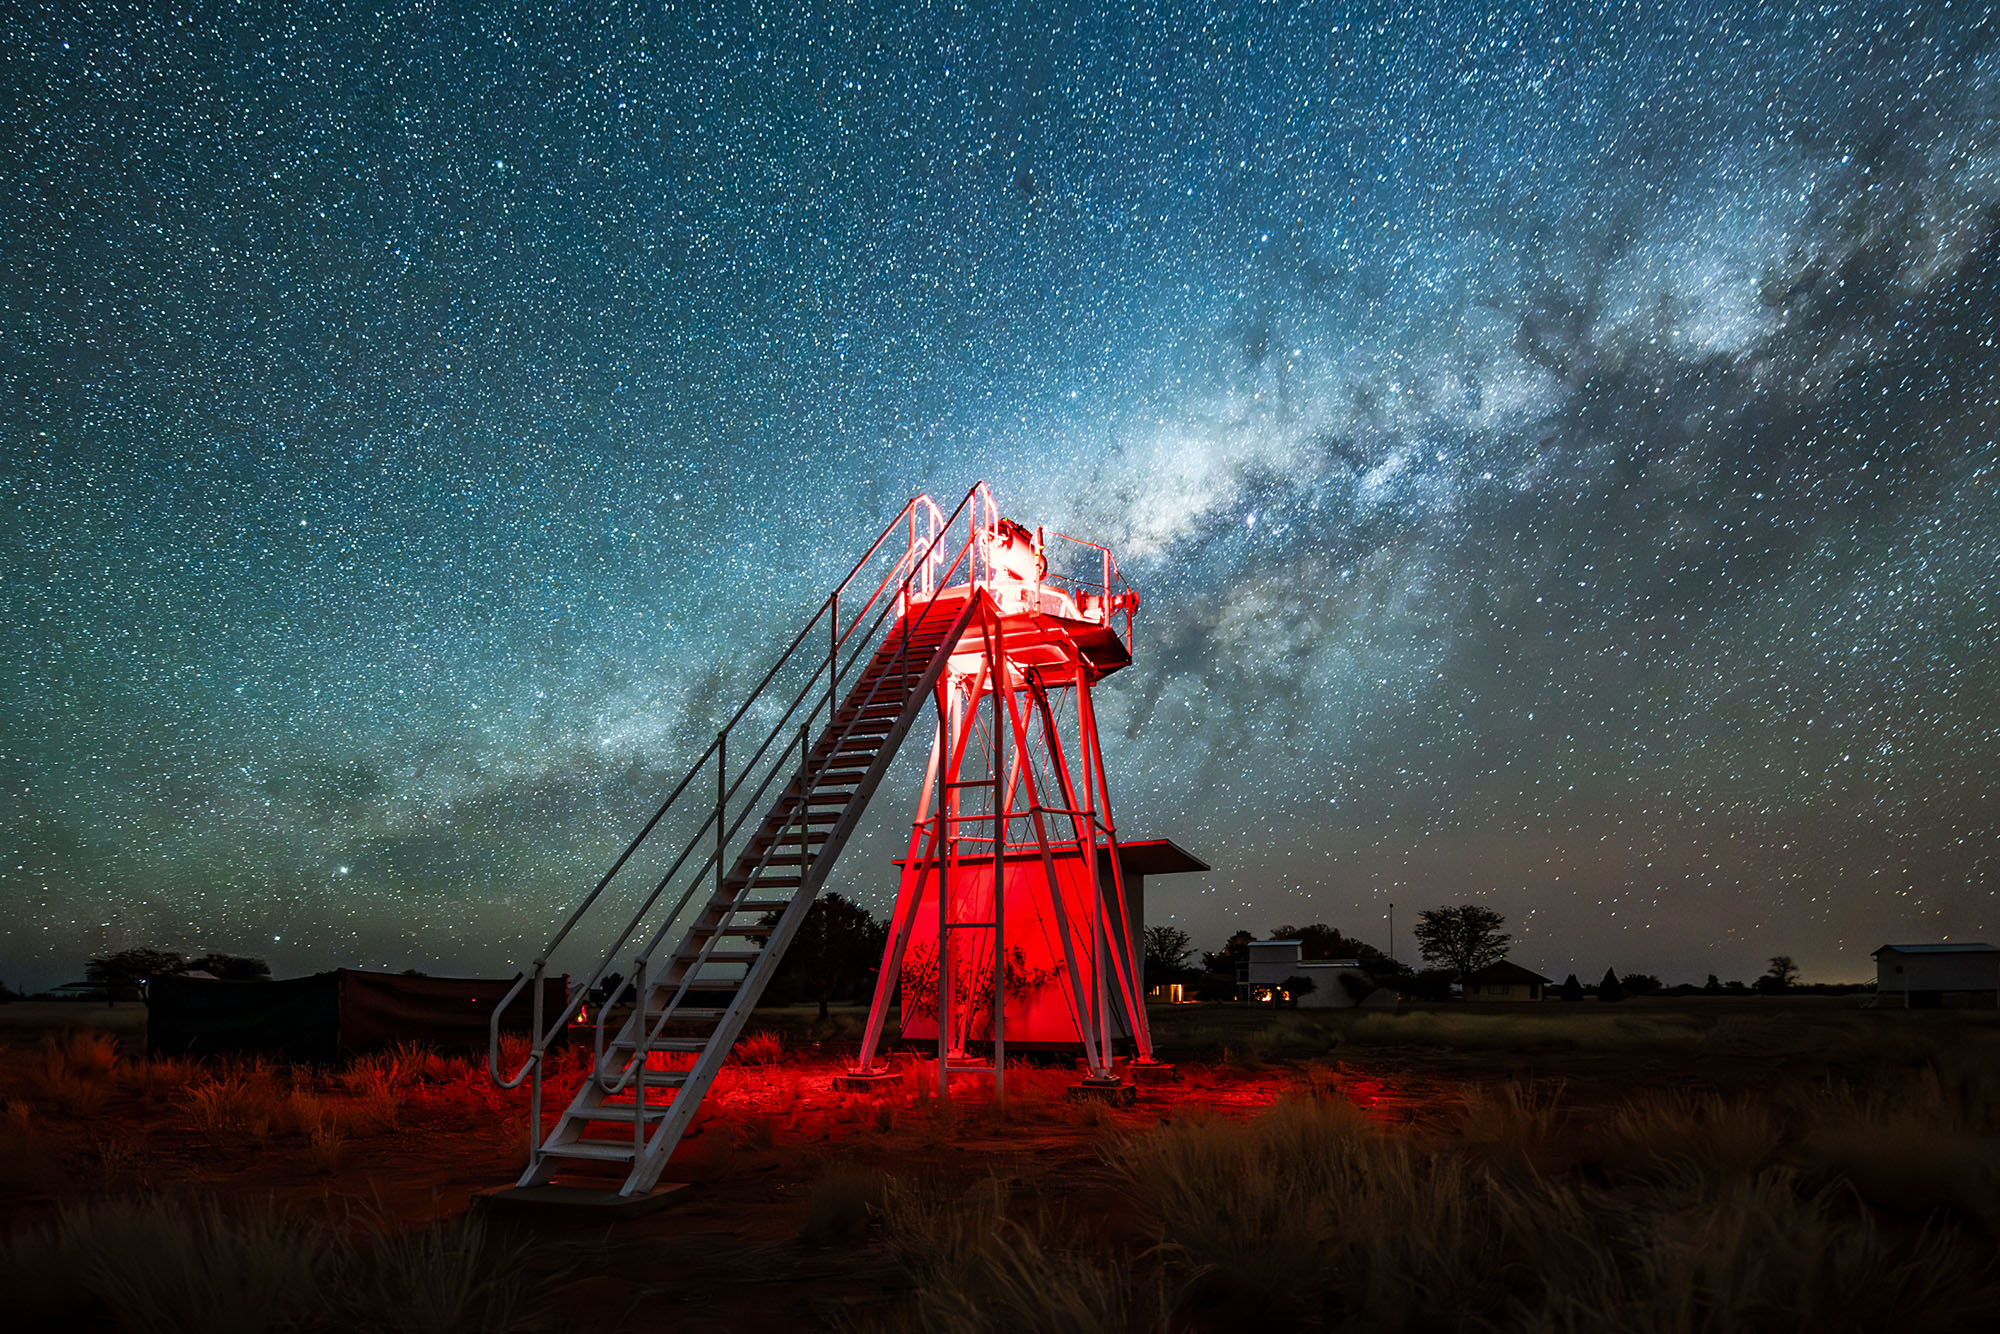 Awakening of the Remote Observatory with Milky Way